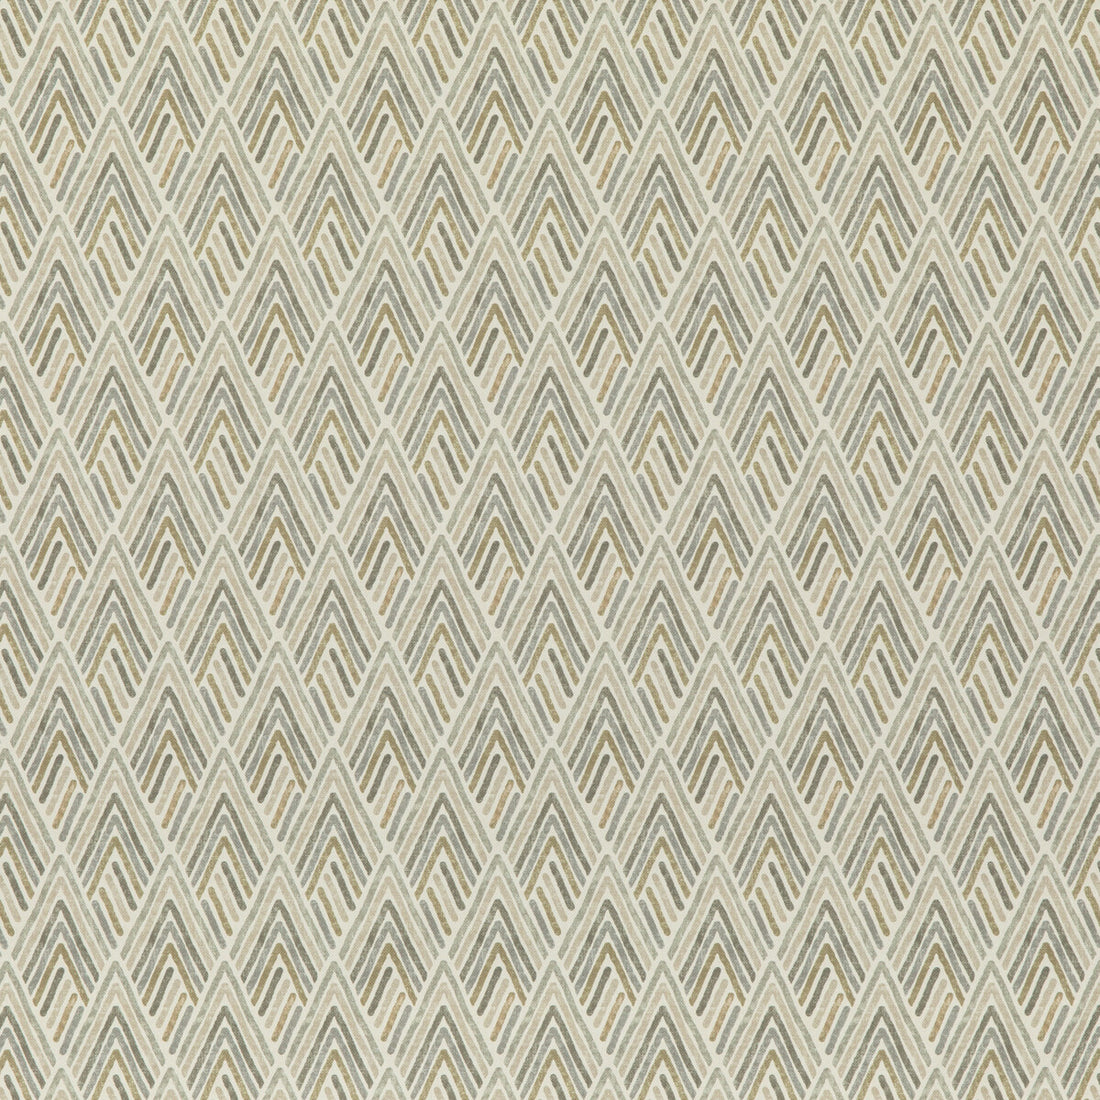 Vista fabric in linen color - pattern ED75041.3.0 - by Threads in the Nala Prints collection